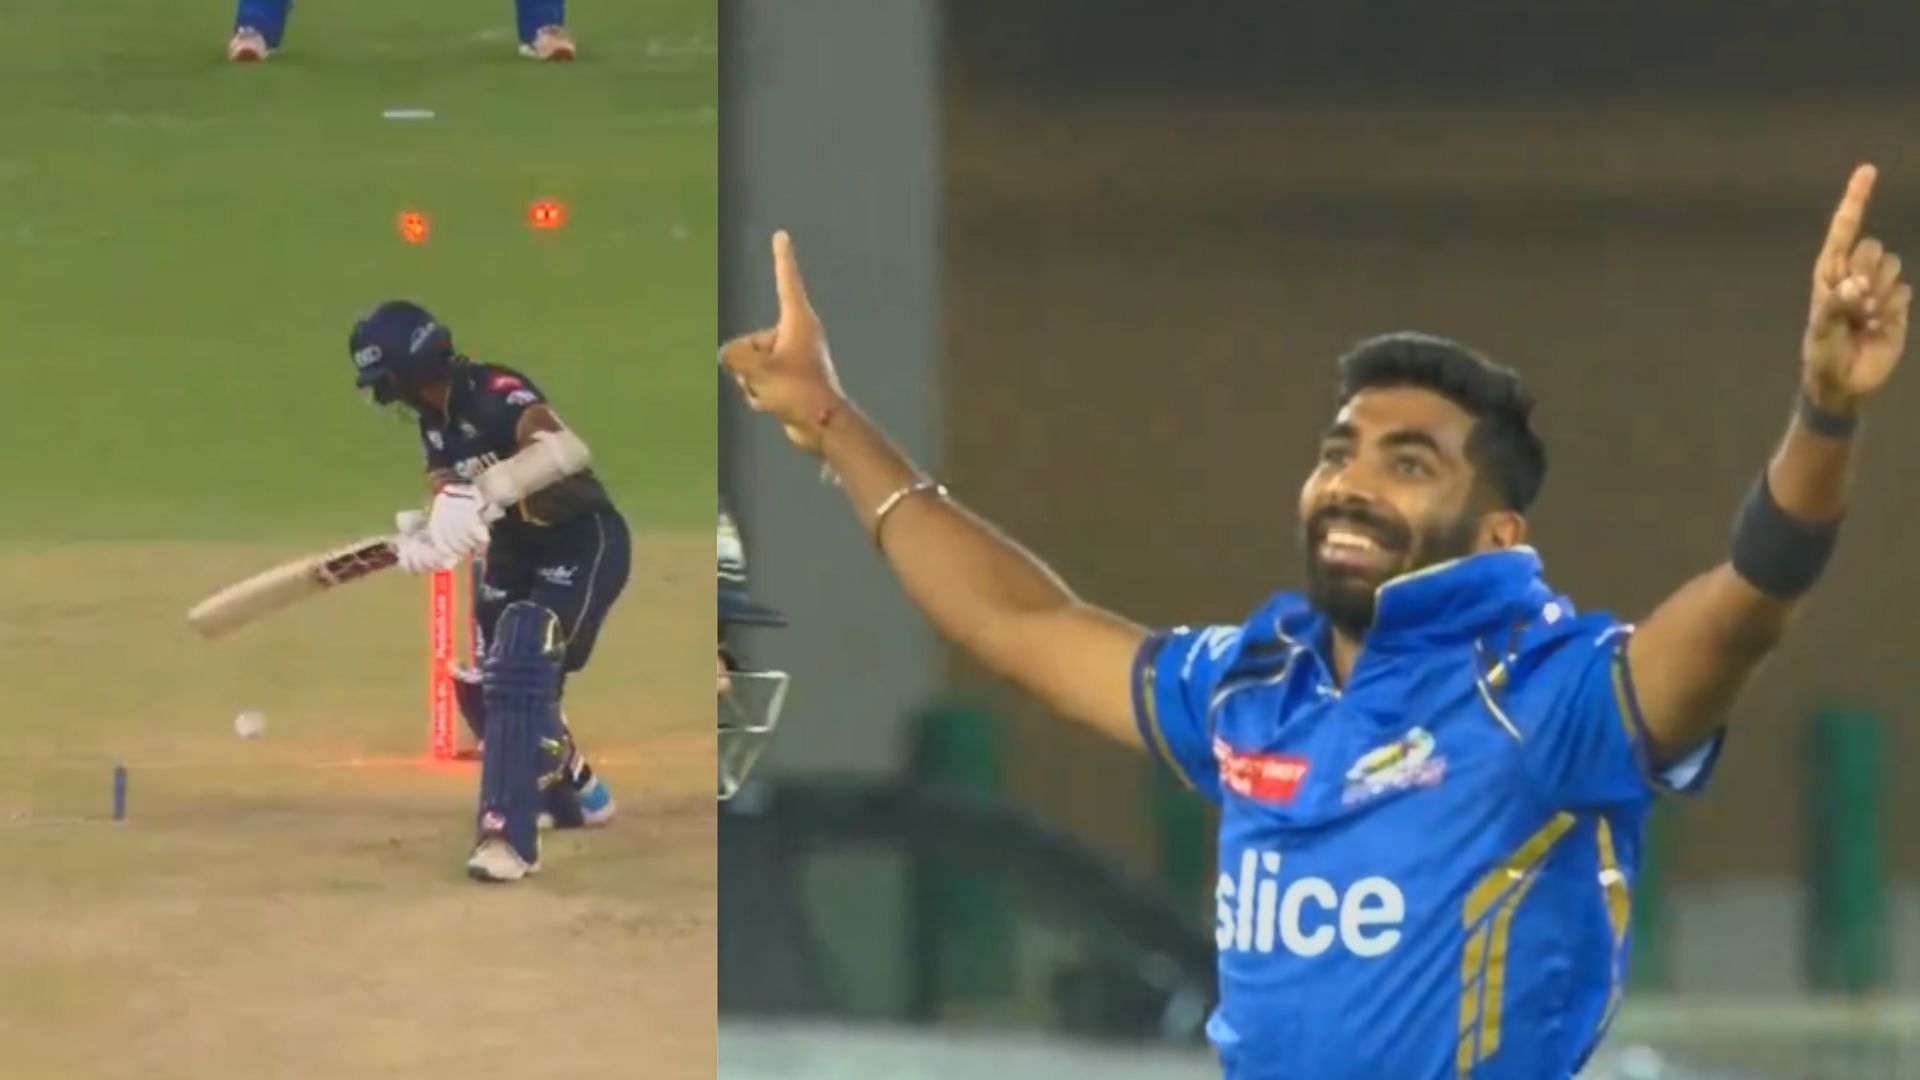 Snippets from Jasprit Bumrah cleaning up Wriddhiman Saha with a magnificent yorker